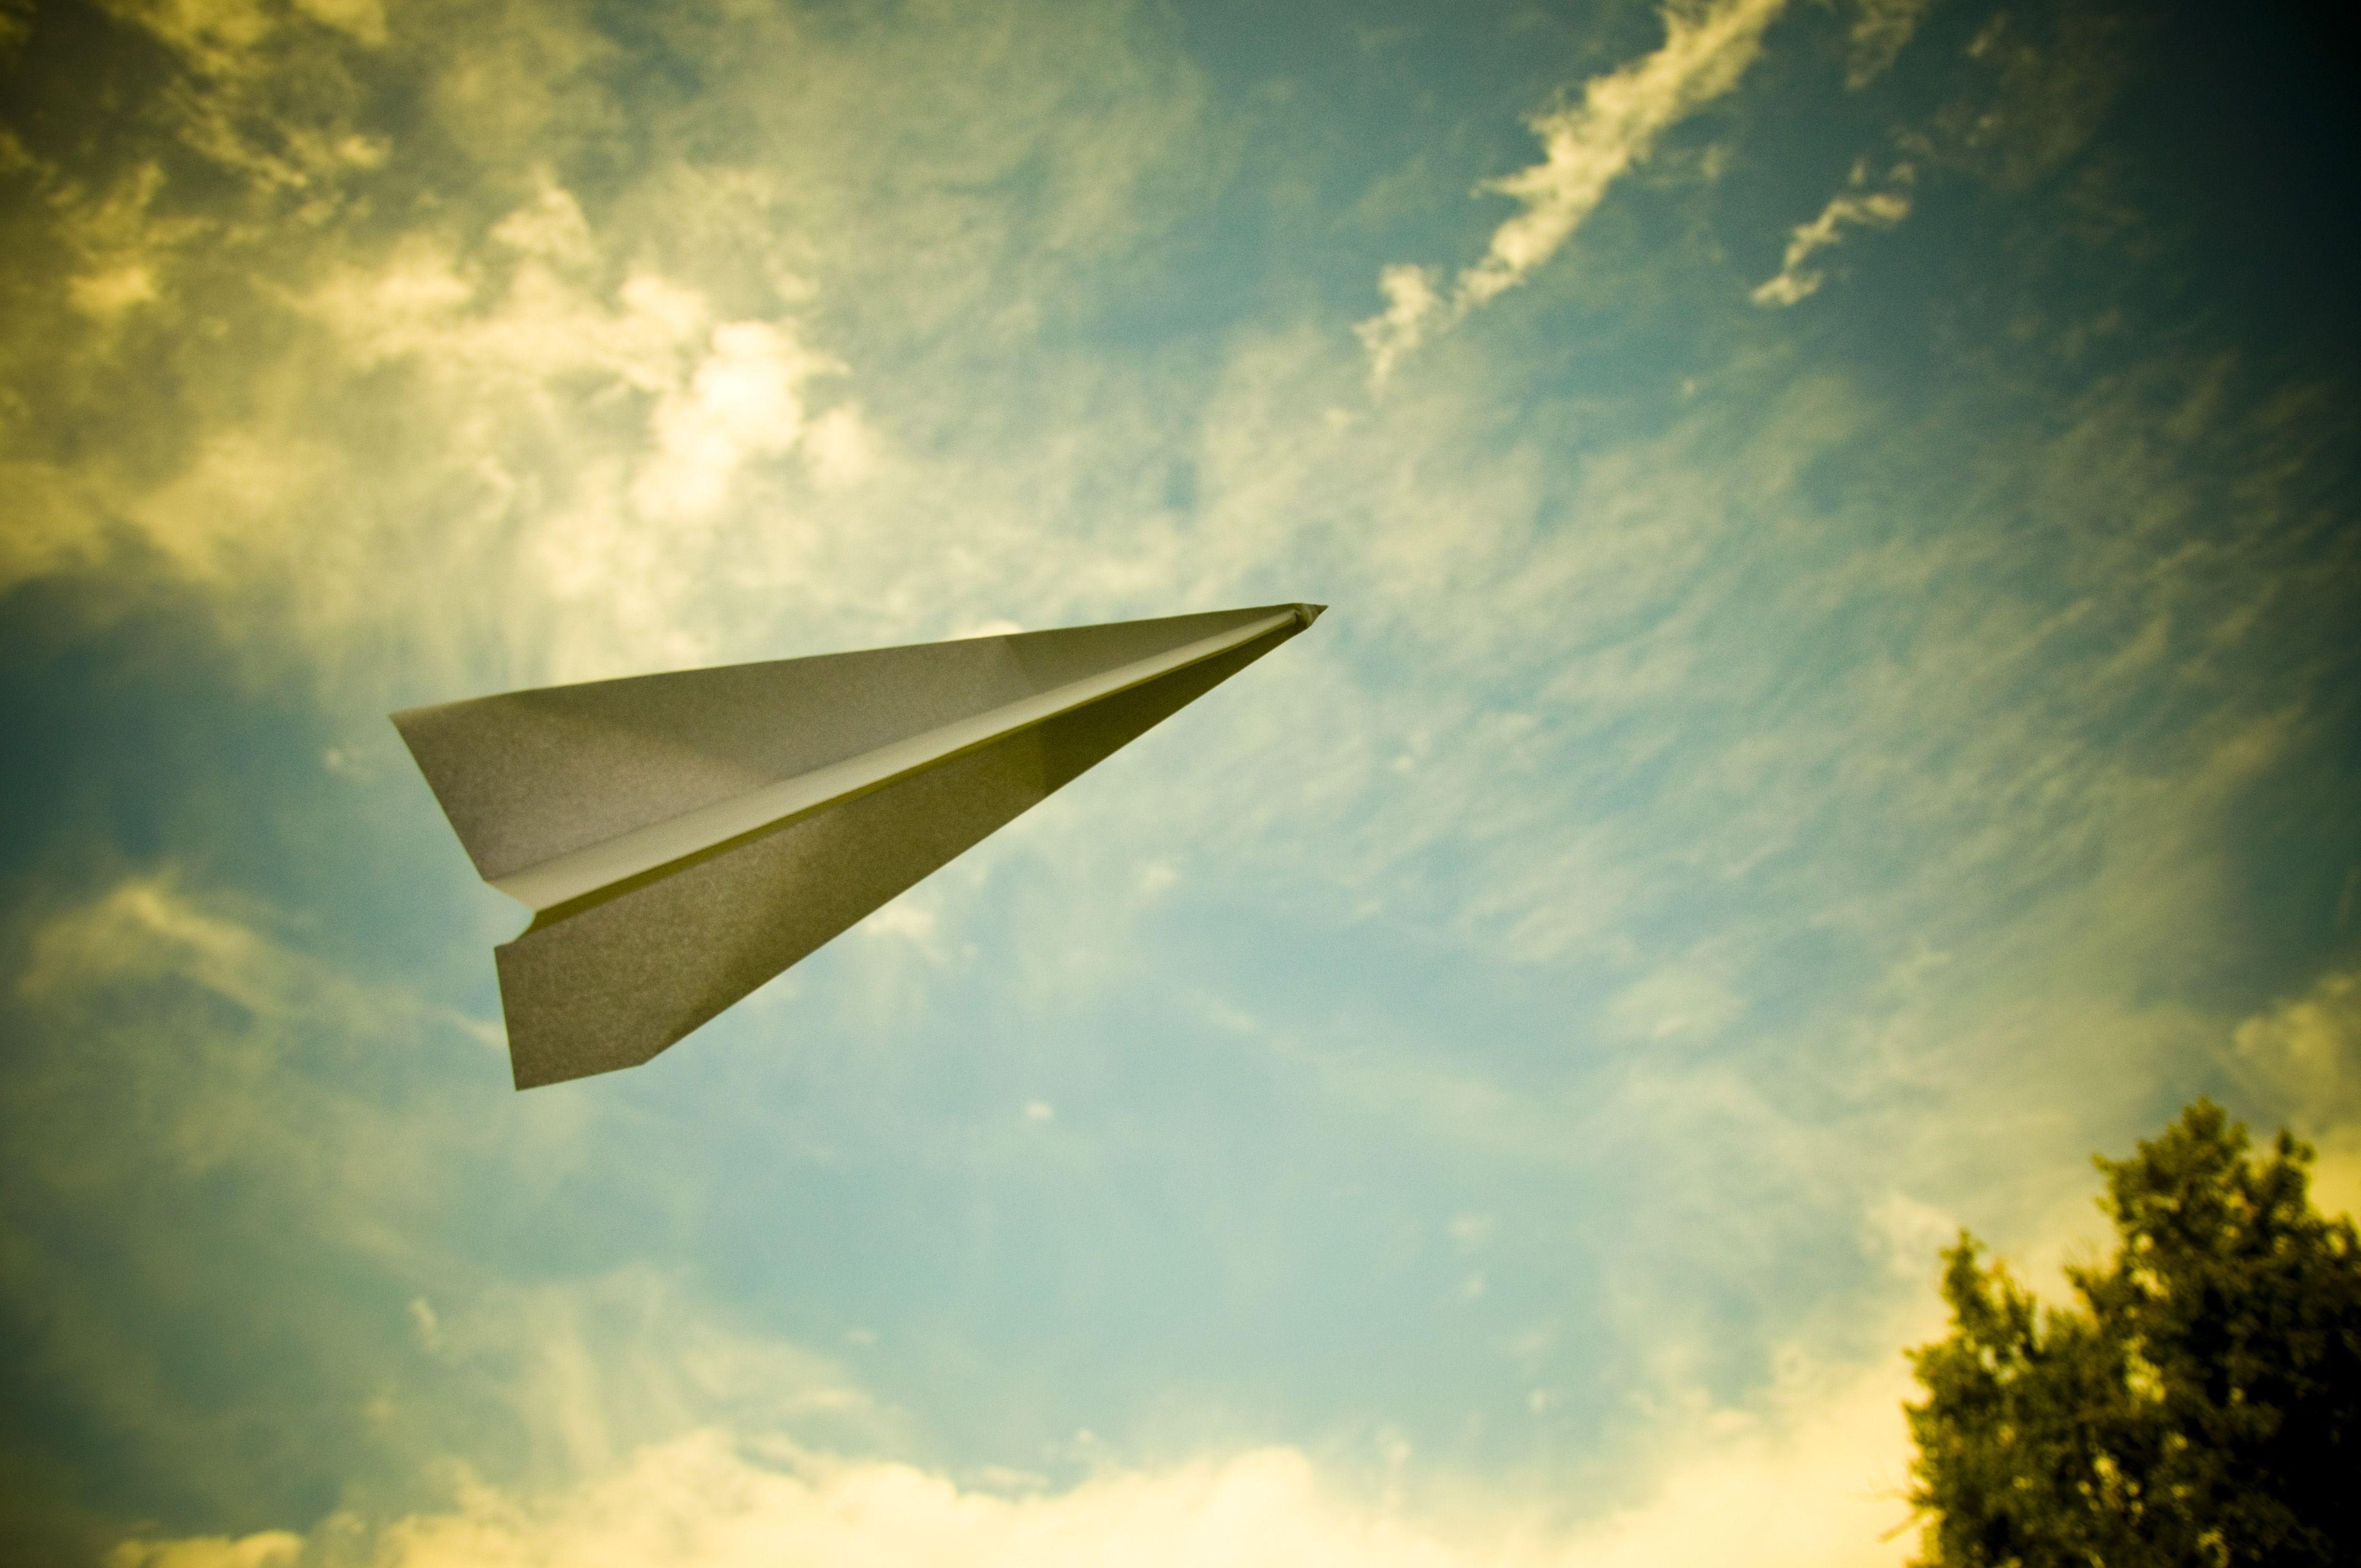 background research about paper airplanes